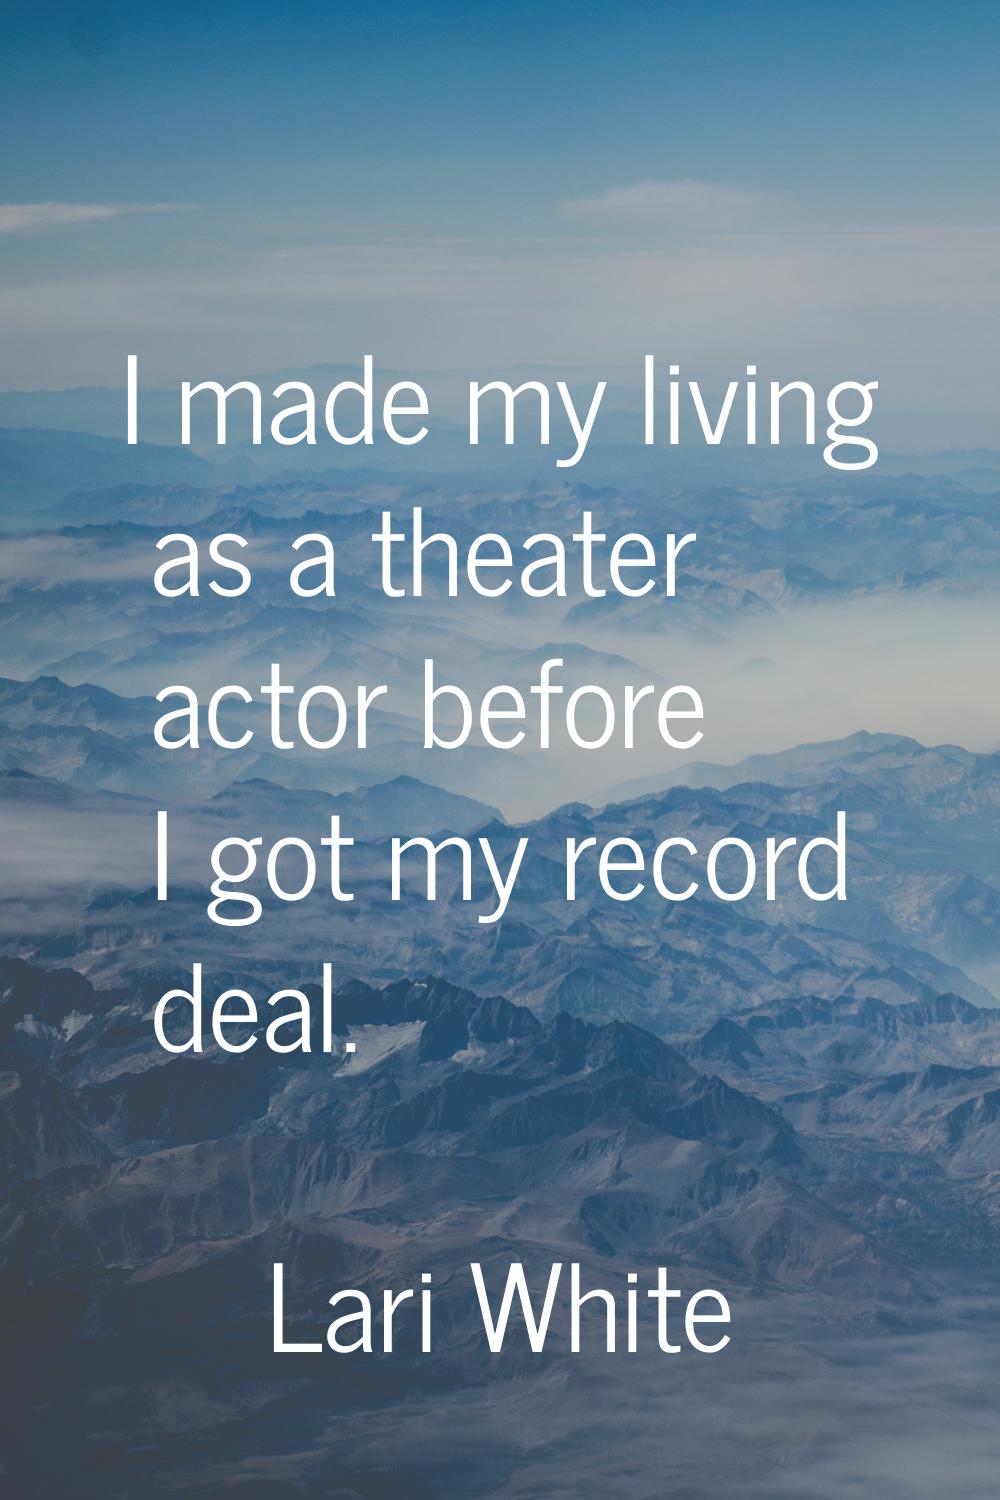 I made my living as a theater actor before I got my record deal.